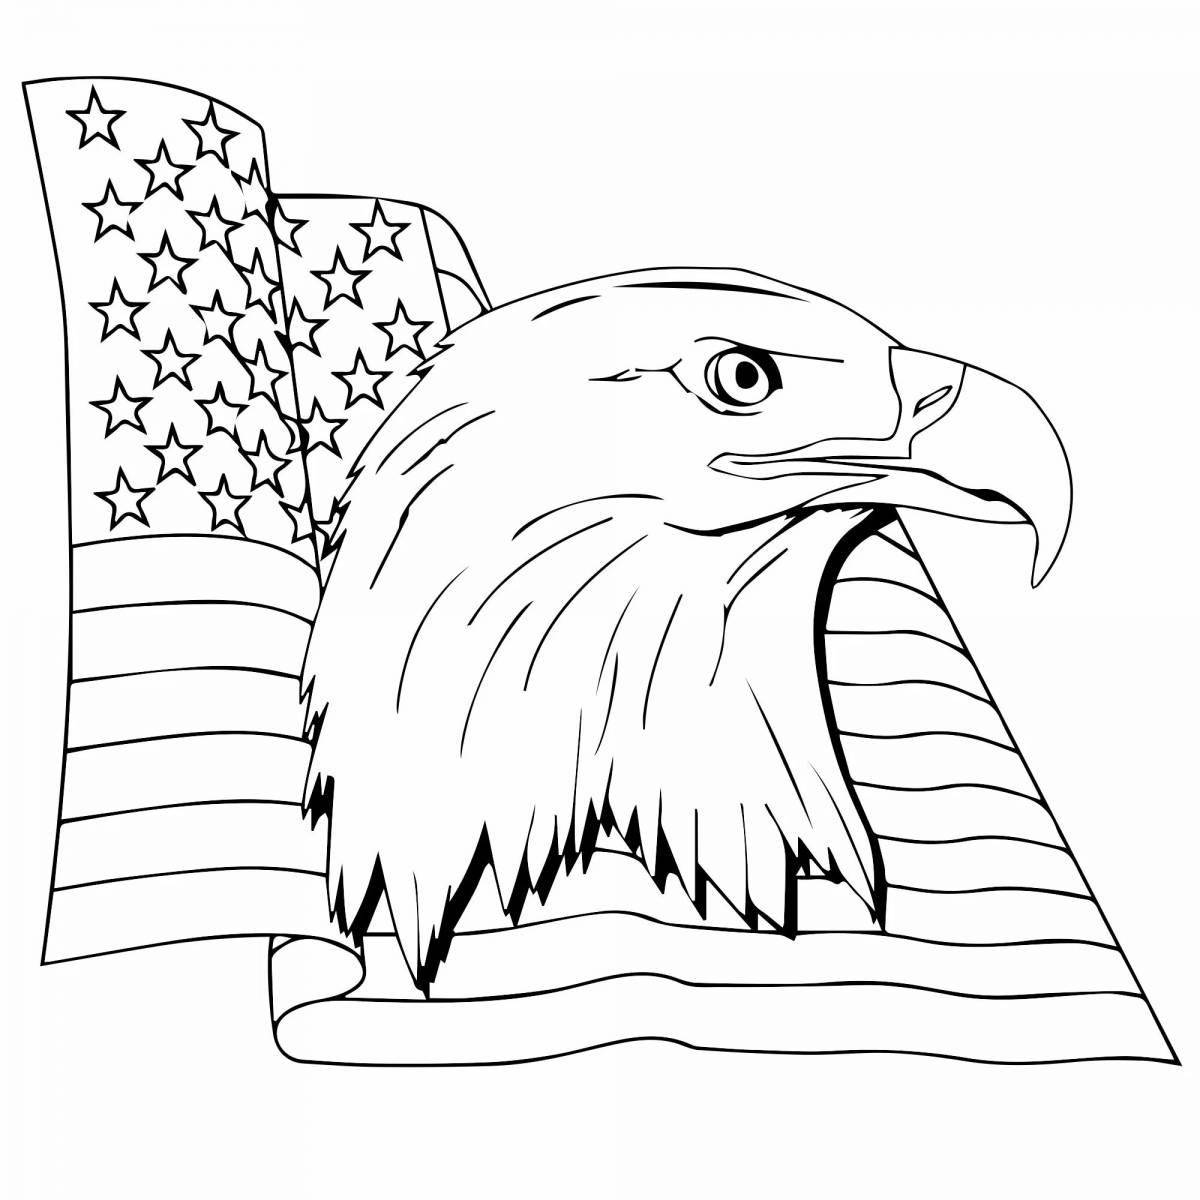 Coloring page shining flag of dagestan